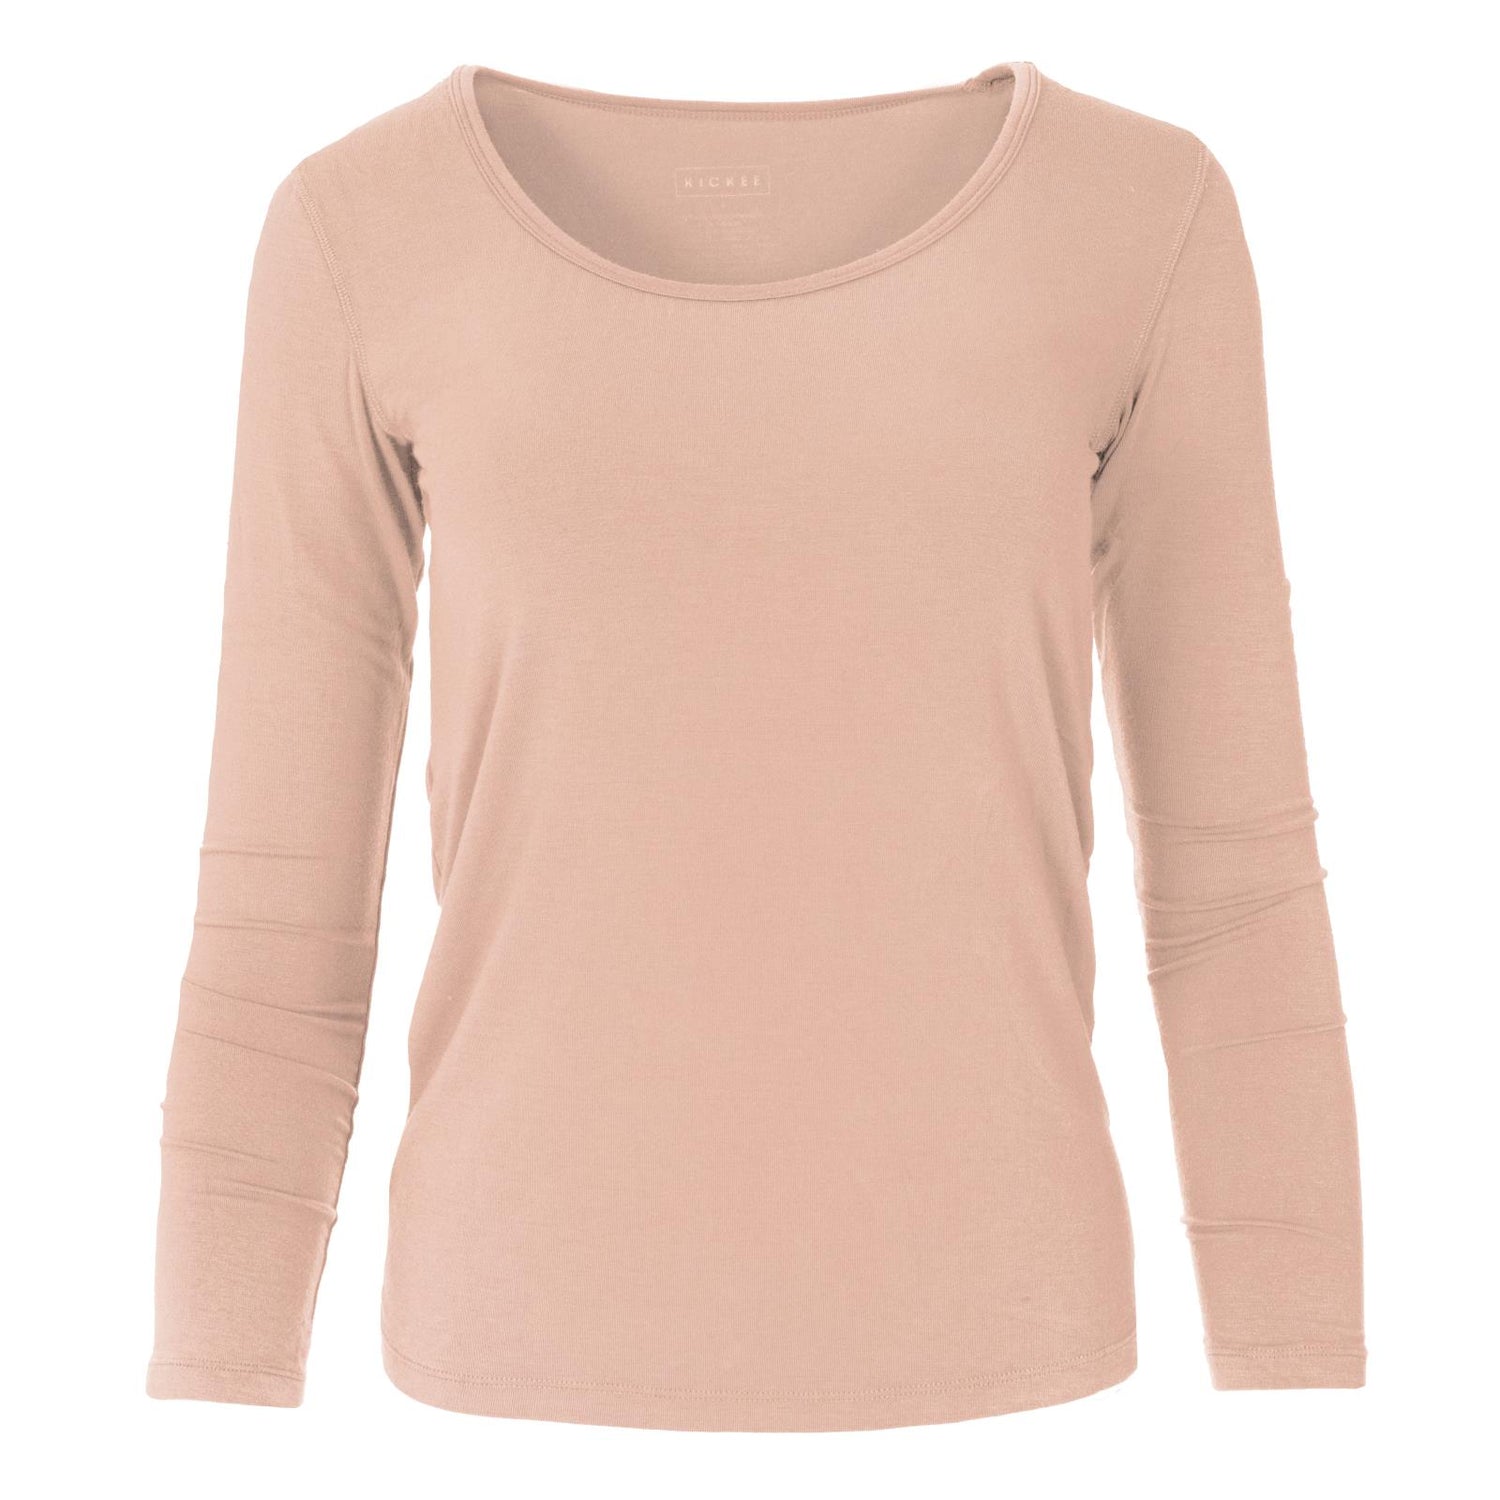 Women's Solid Long Sleeve Loosey Goosey Tee in Peach Blossom